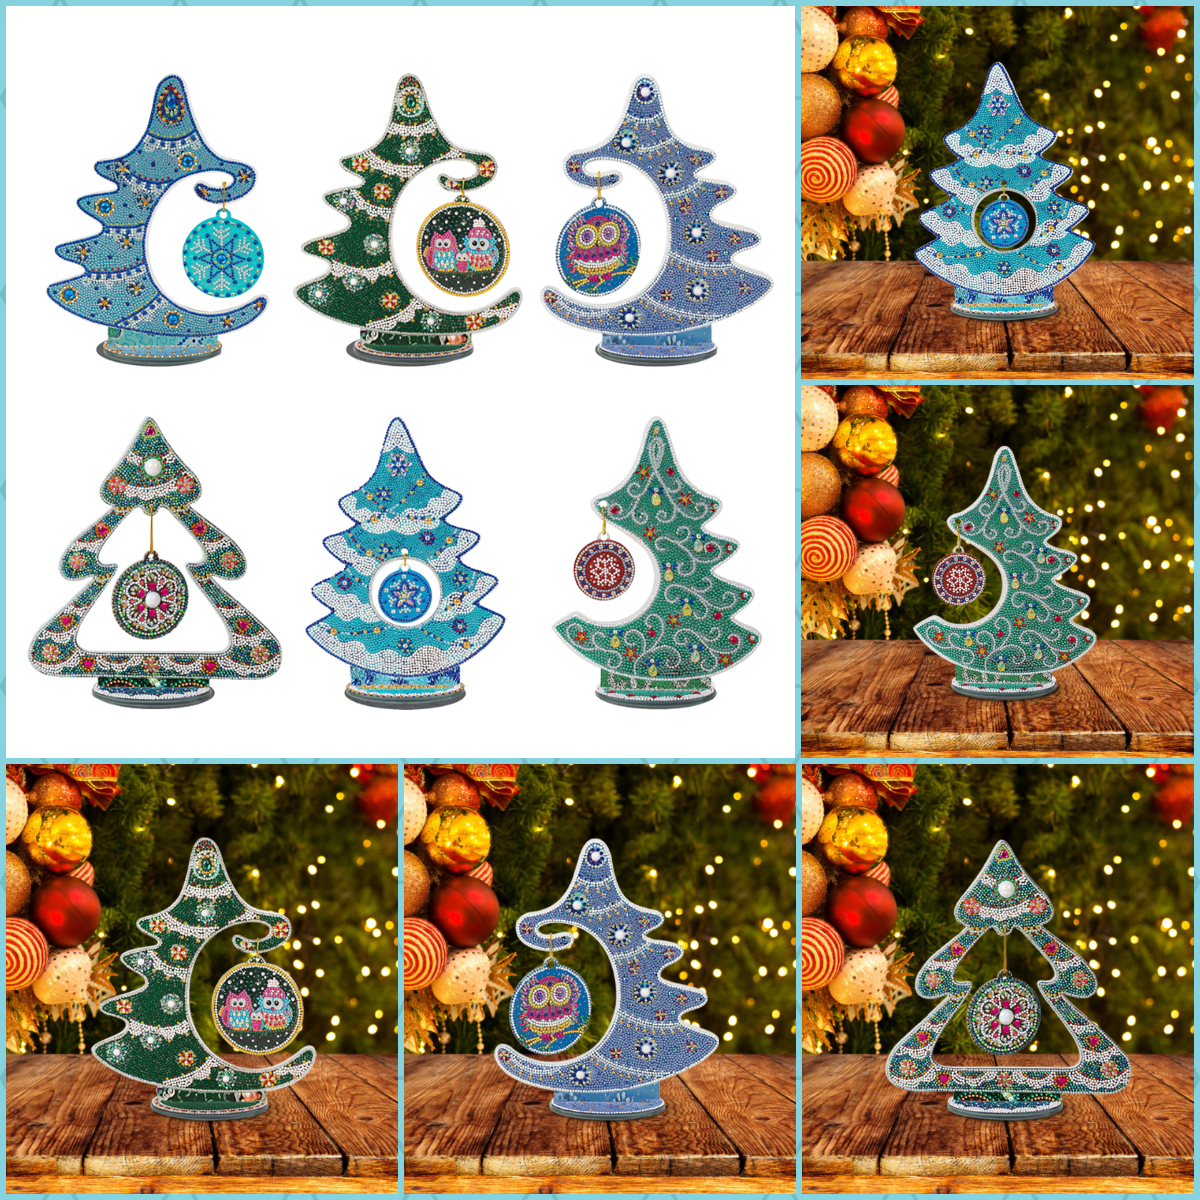 Diy Artificial Diamond Art Valentine's Holiday Ornaments Without Tray Wood  Material Diamond Painting Crystal Rhinestone Ornaments With Stand Table  Decorative Diamond Painting Table Decorative Diamond Art Table Decorative  Diamond Dot Art Holiday